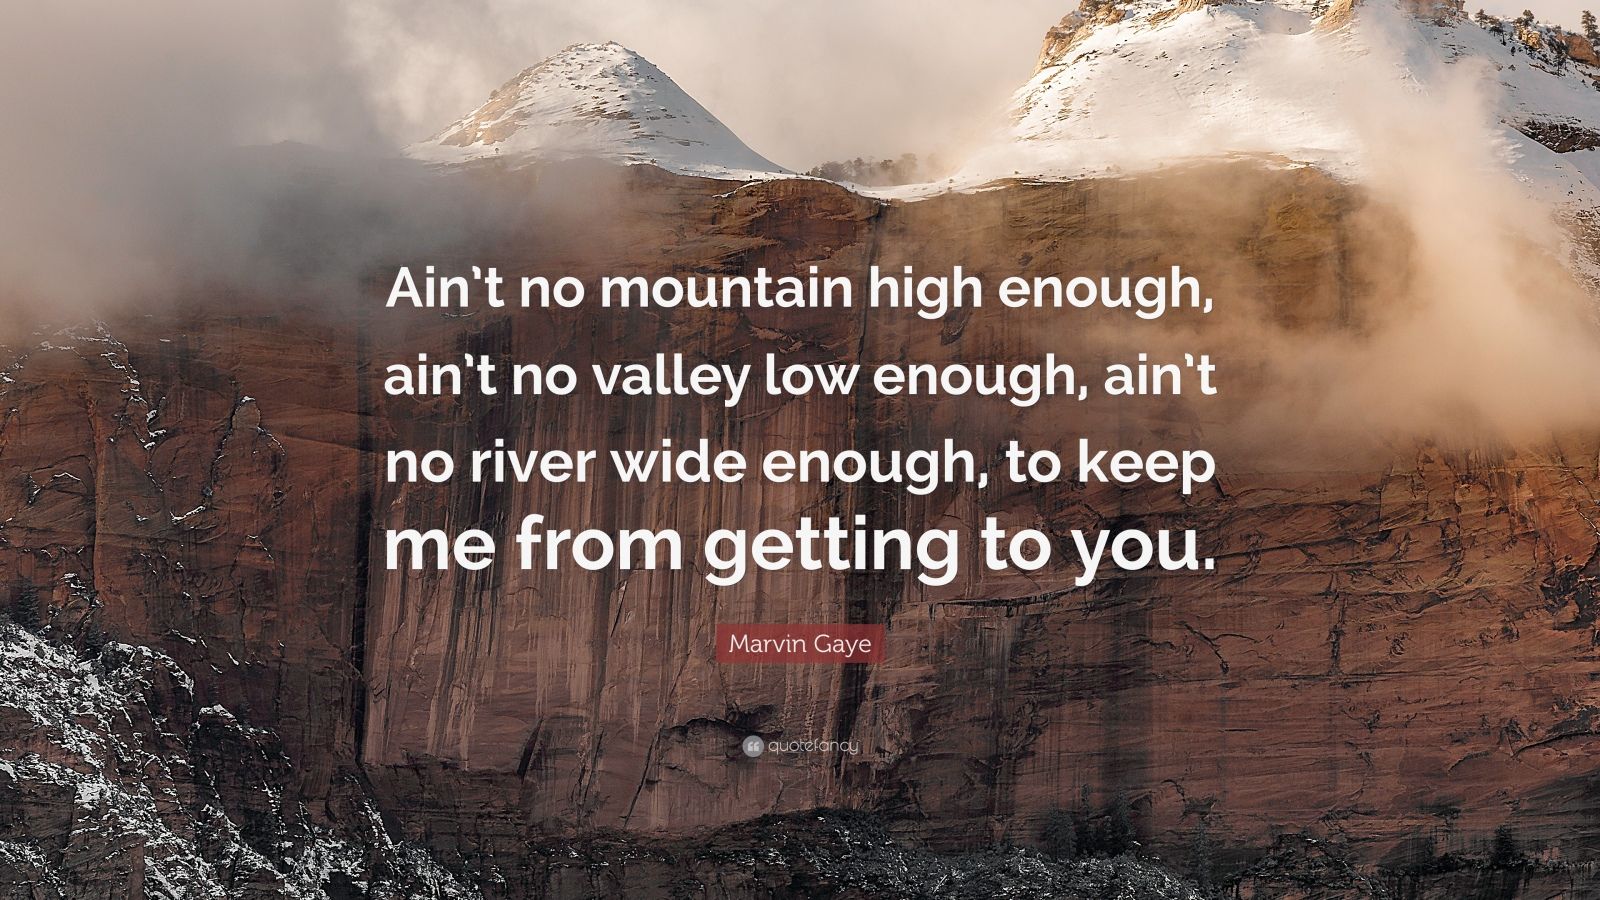 Marvin Gaye Quote: "Ain't no mountain high enough, ain't ...